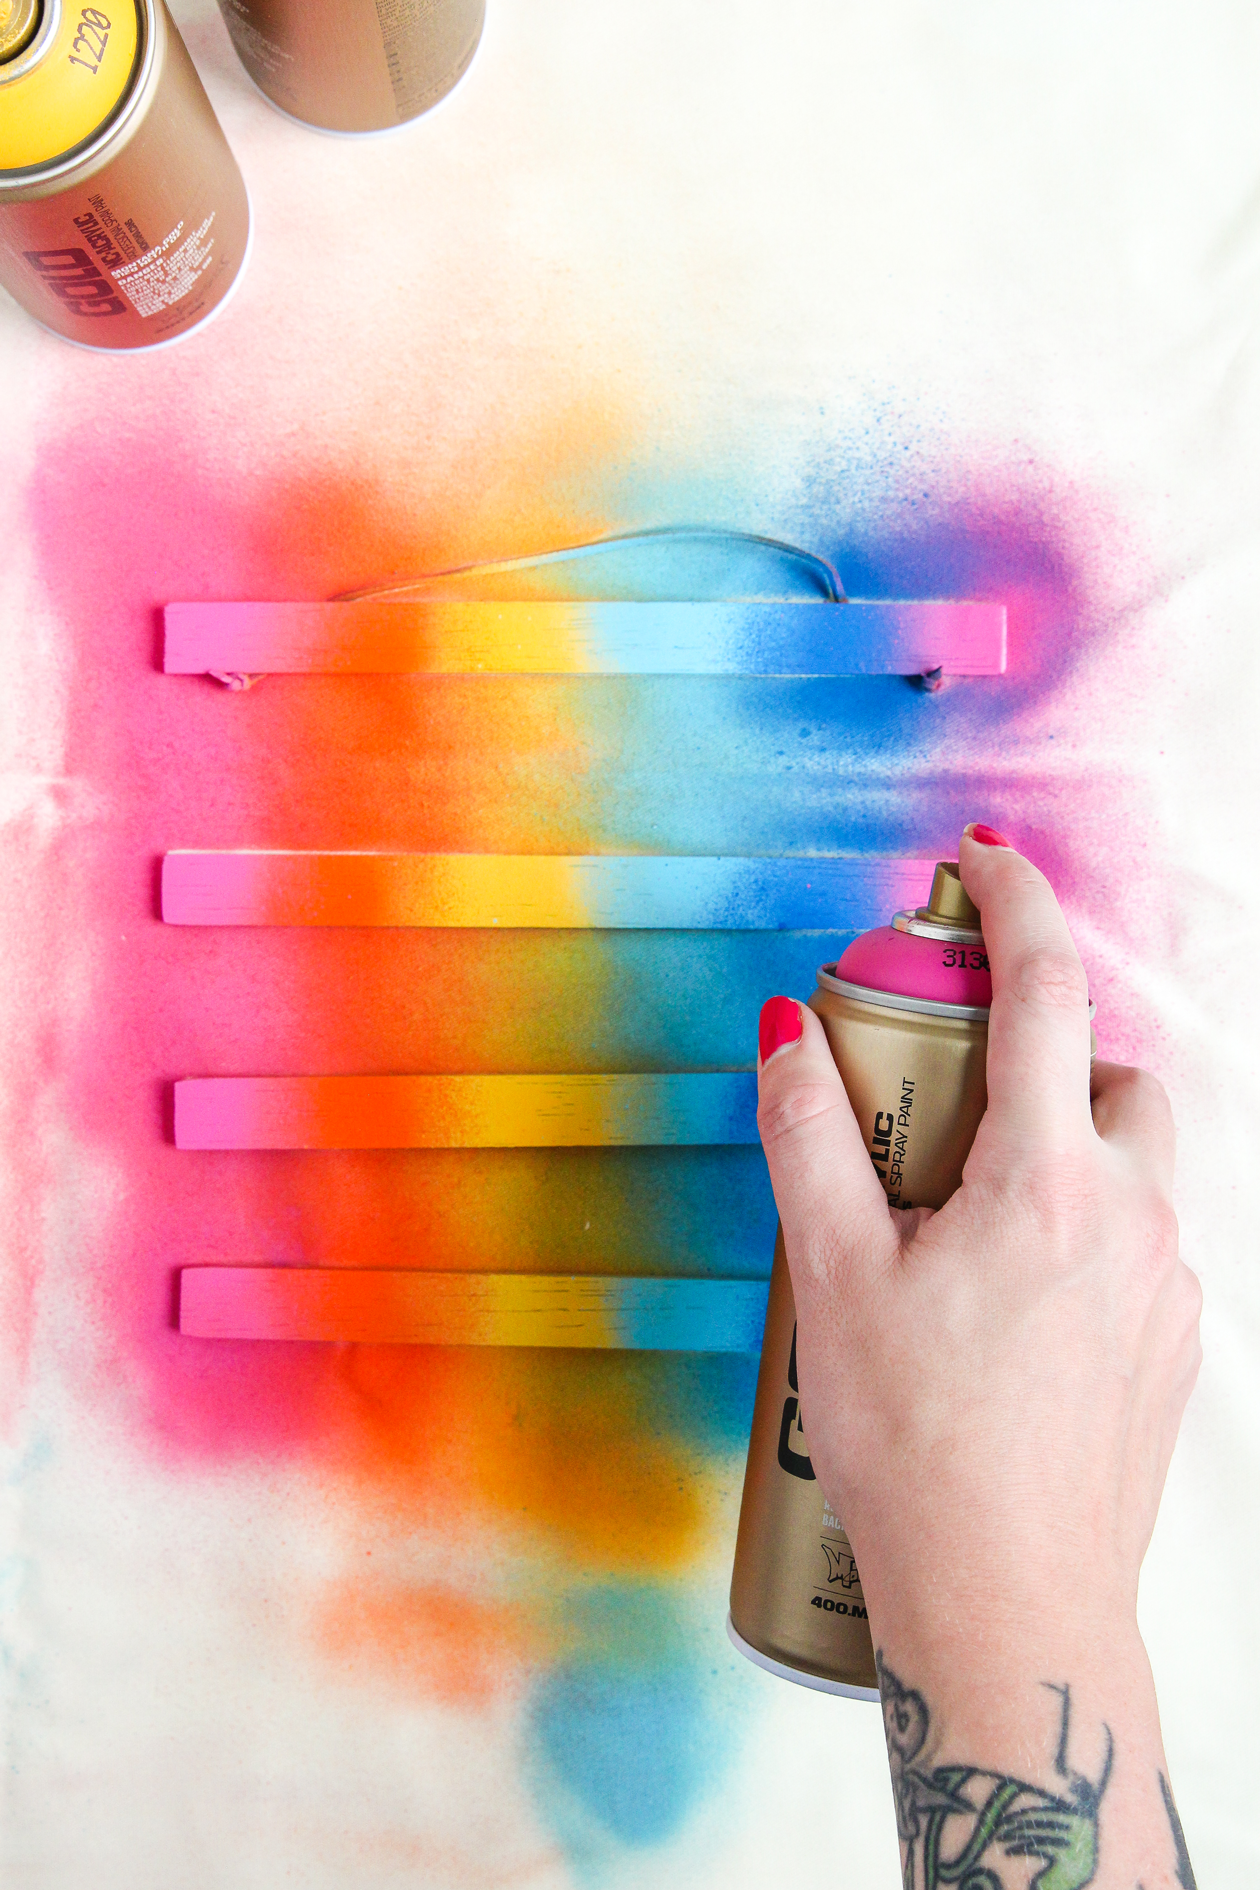 Learn how to make this DIY Rainbow Poster Hanger in just 10 minutes!